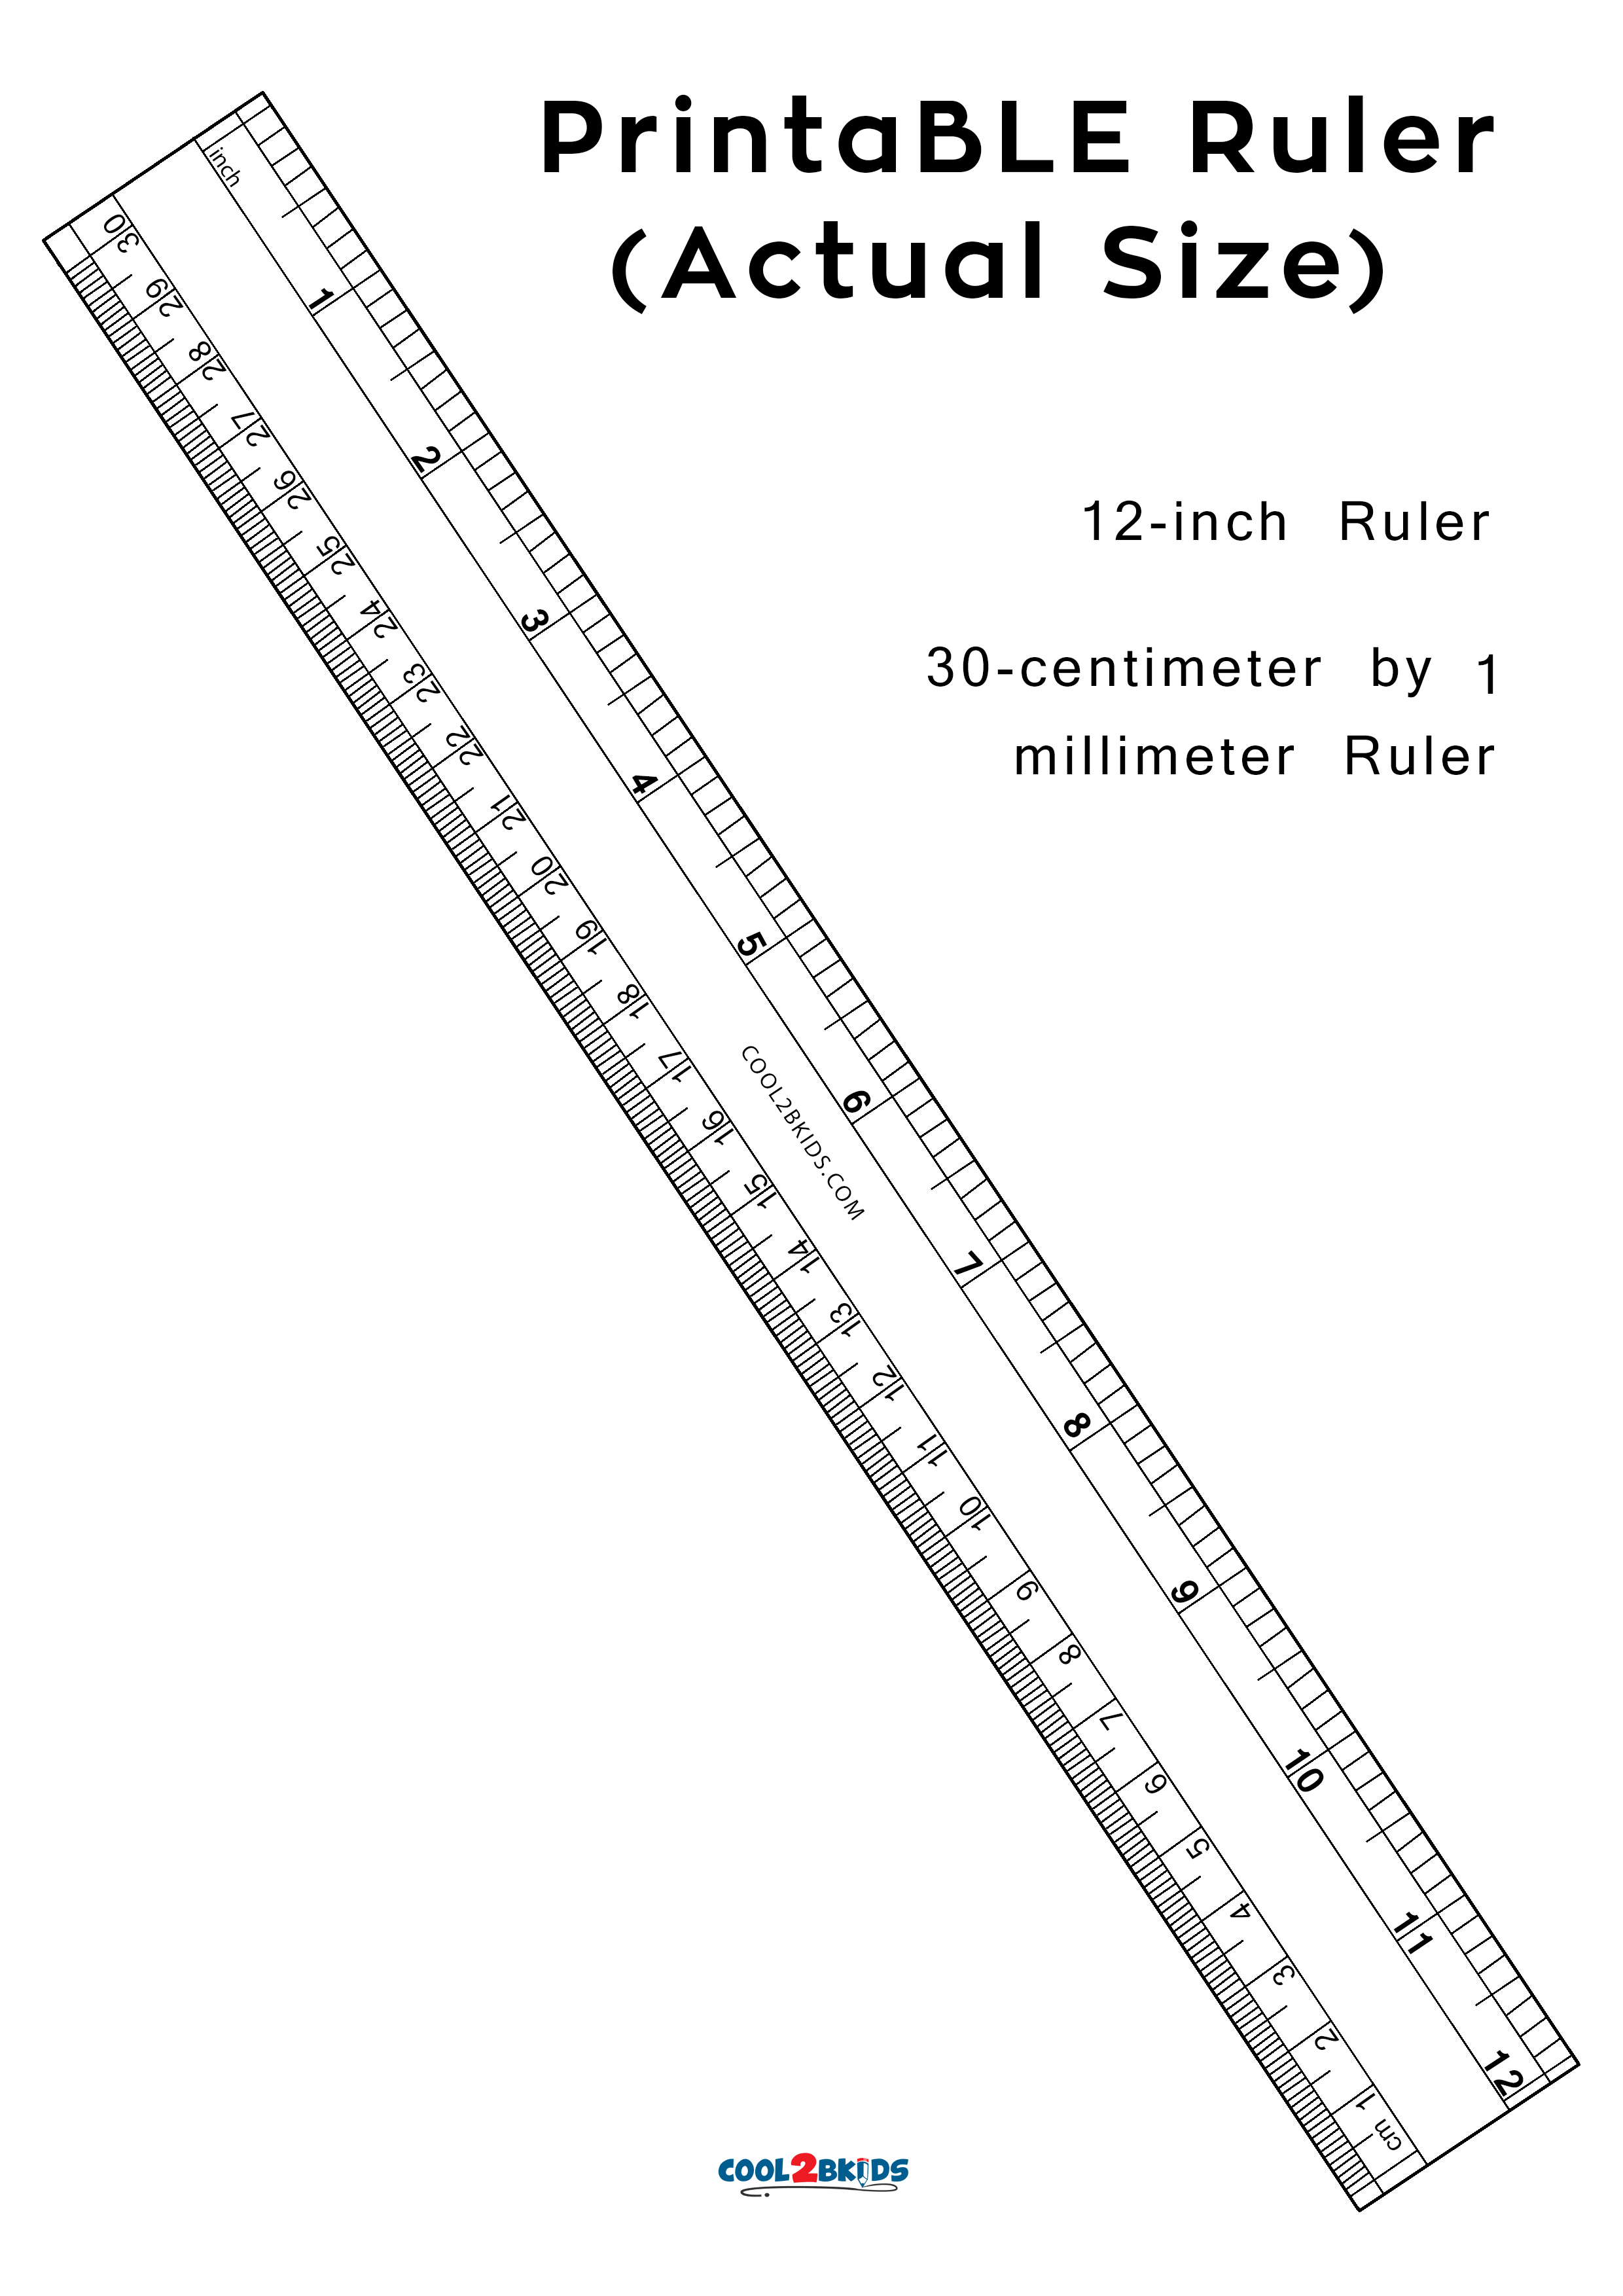 printable-ruler-12-inch-actual-size